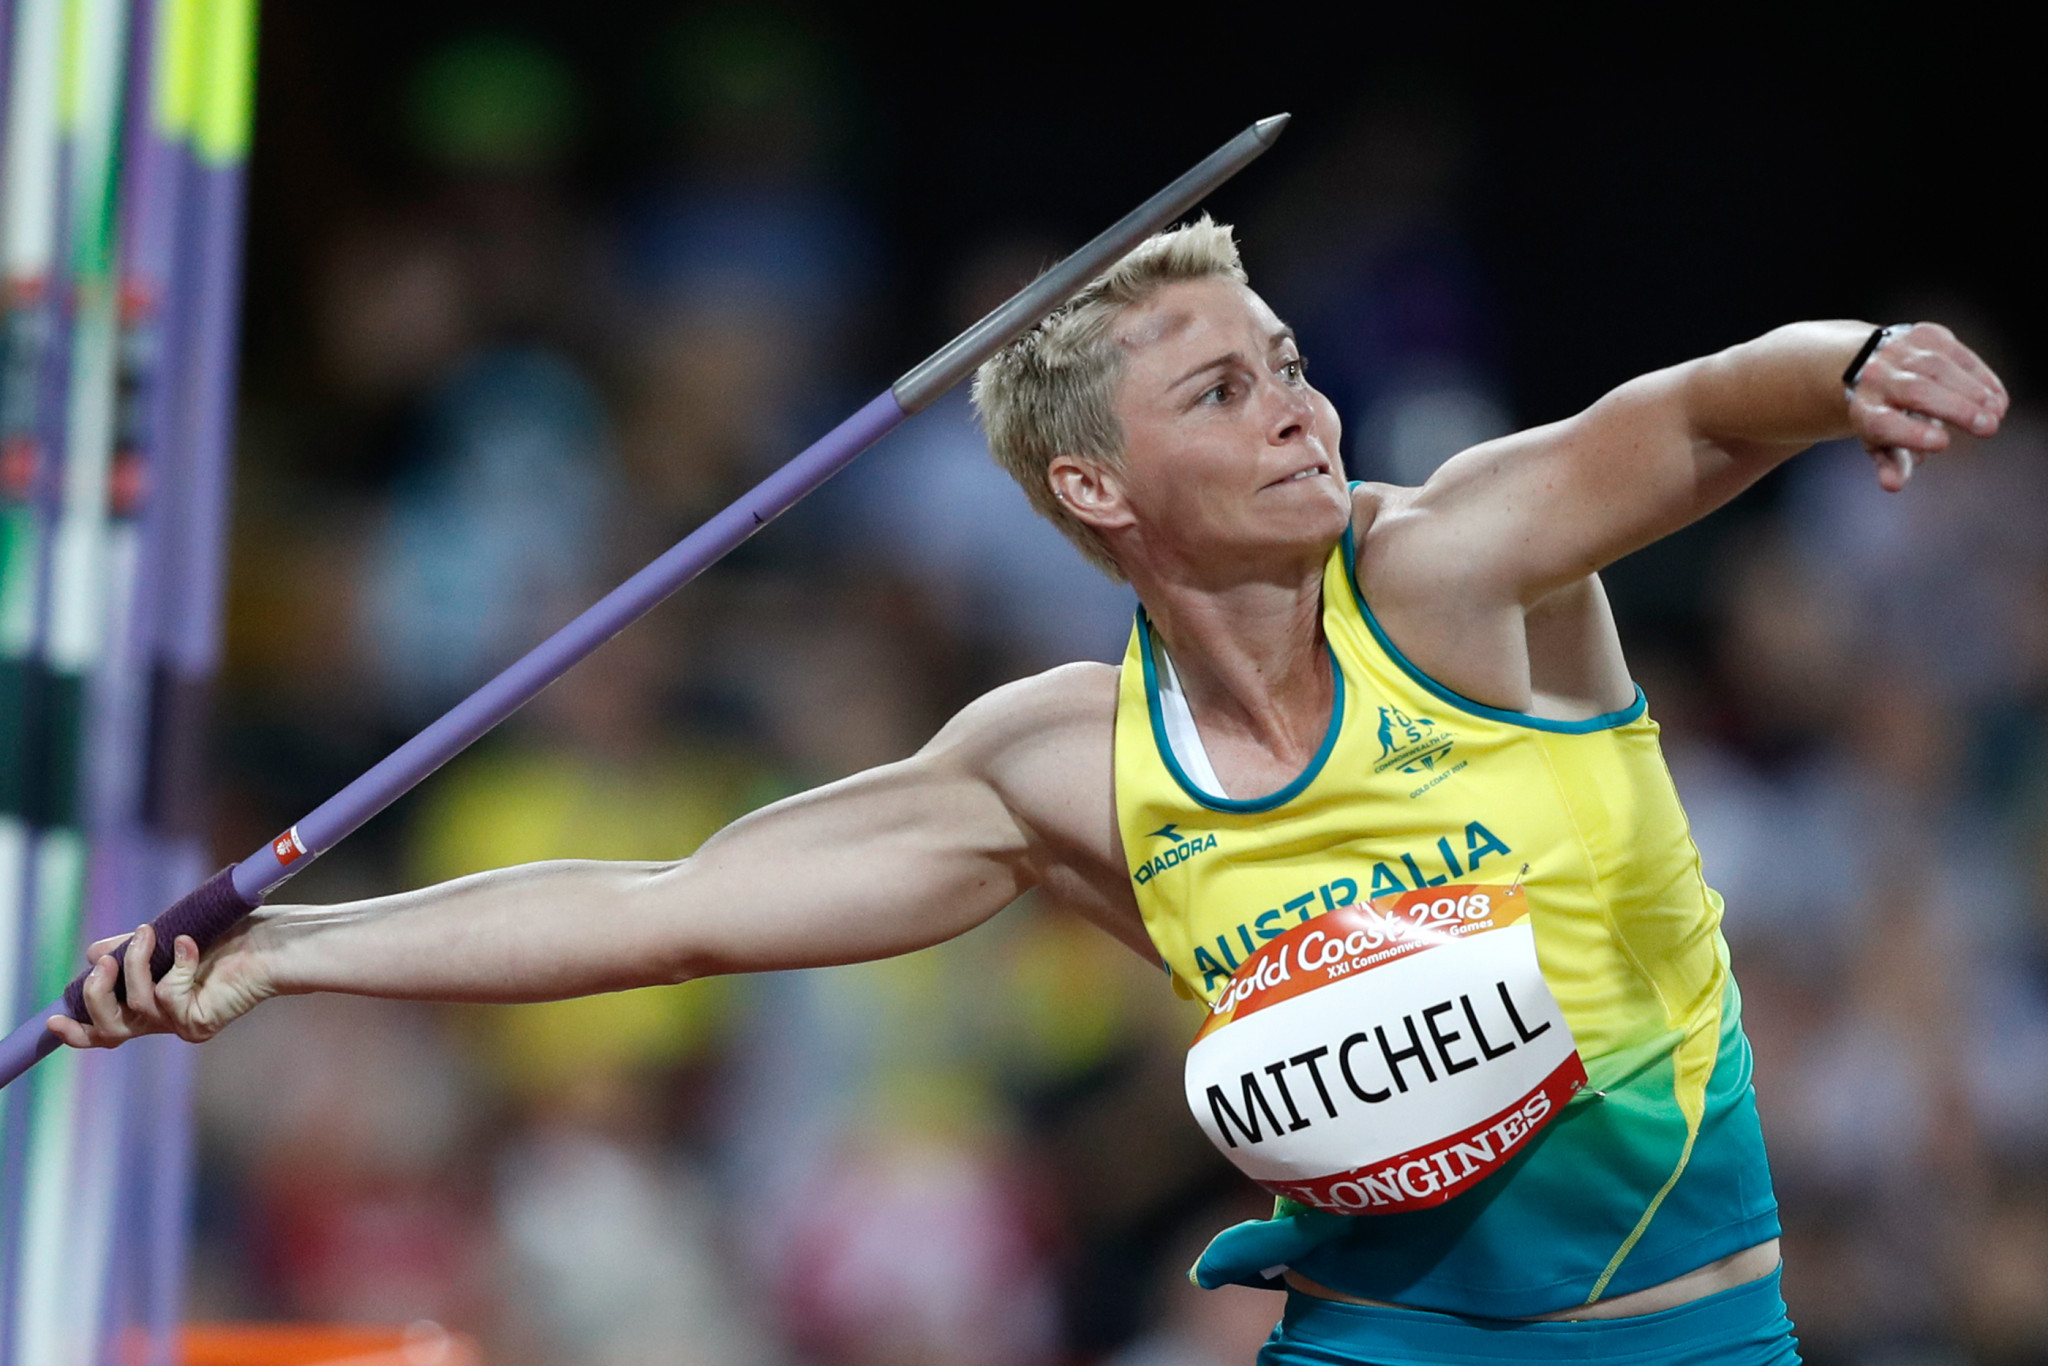 Kathryn Mitchell was one of four Australian gold medallists in athletics this evening, winning the women's javelin throw with a Commonwealth Games record ©Getty Images